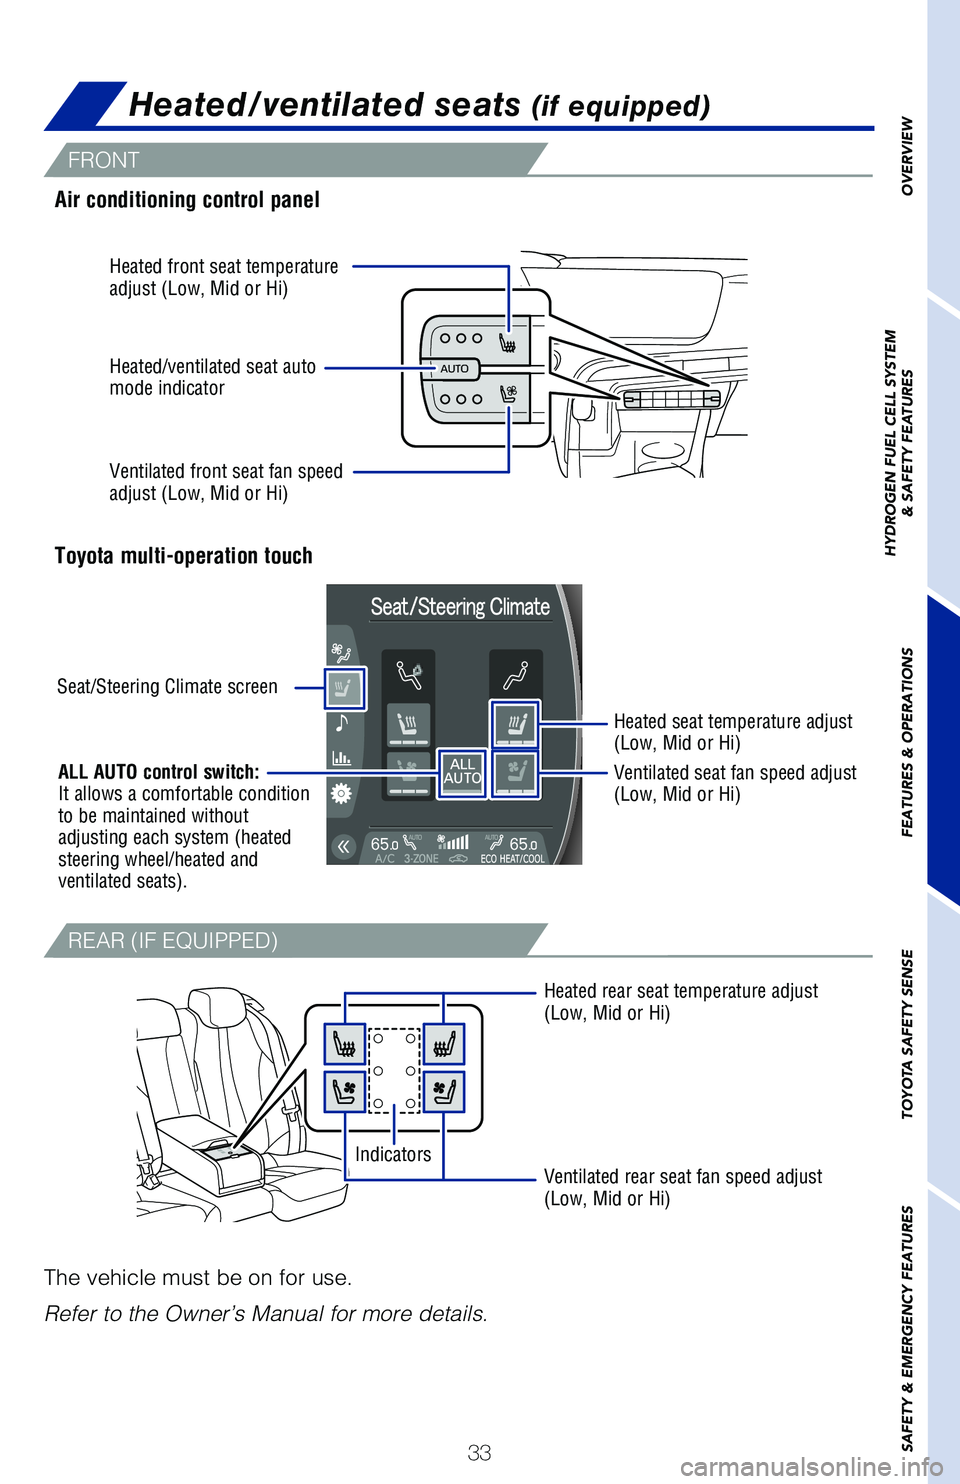 TOYOTA MIRAI 2021   (in English) User Guide 33
OVERVIEW
HYDROGEN FUEL CELL SYSTEM
& SAFETY FEATURES
FEATURES & OPERATIONS
TOYOTA SAFETY SENSE
SAFETY & EMERGENCY FEATURESAir conditioning control panel
Toyota multi-operation touch
Heated rear sea